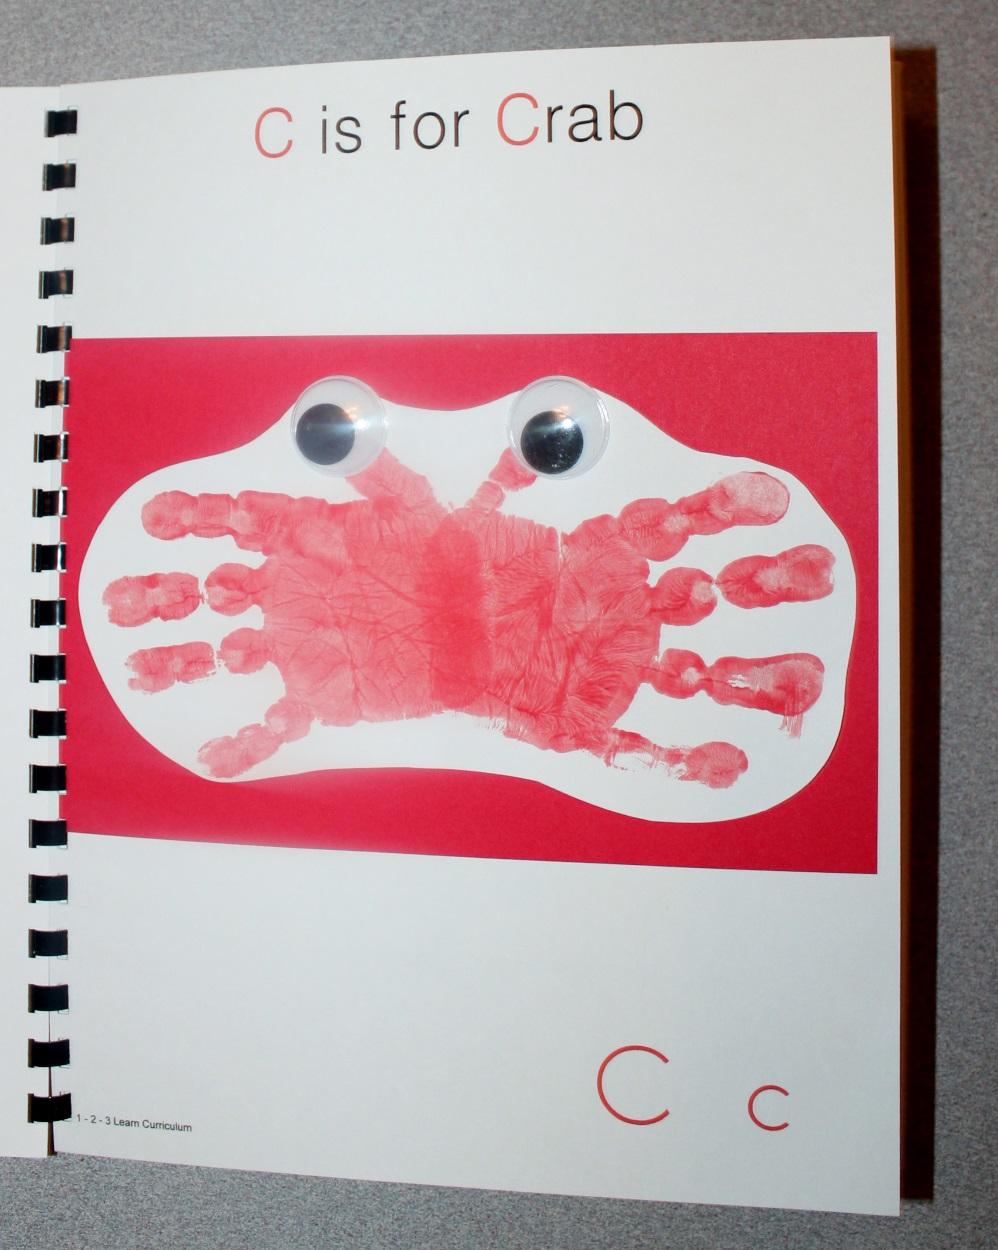 C is for Crab For the crab you will need to paint each hand red. Paint one, place on white card stock. Make sure to leave enough room on the paper for the placement of the other hand print.